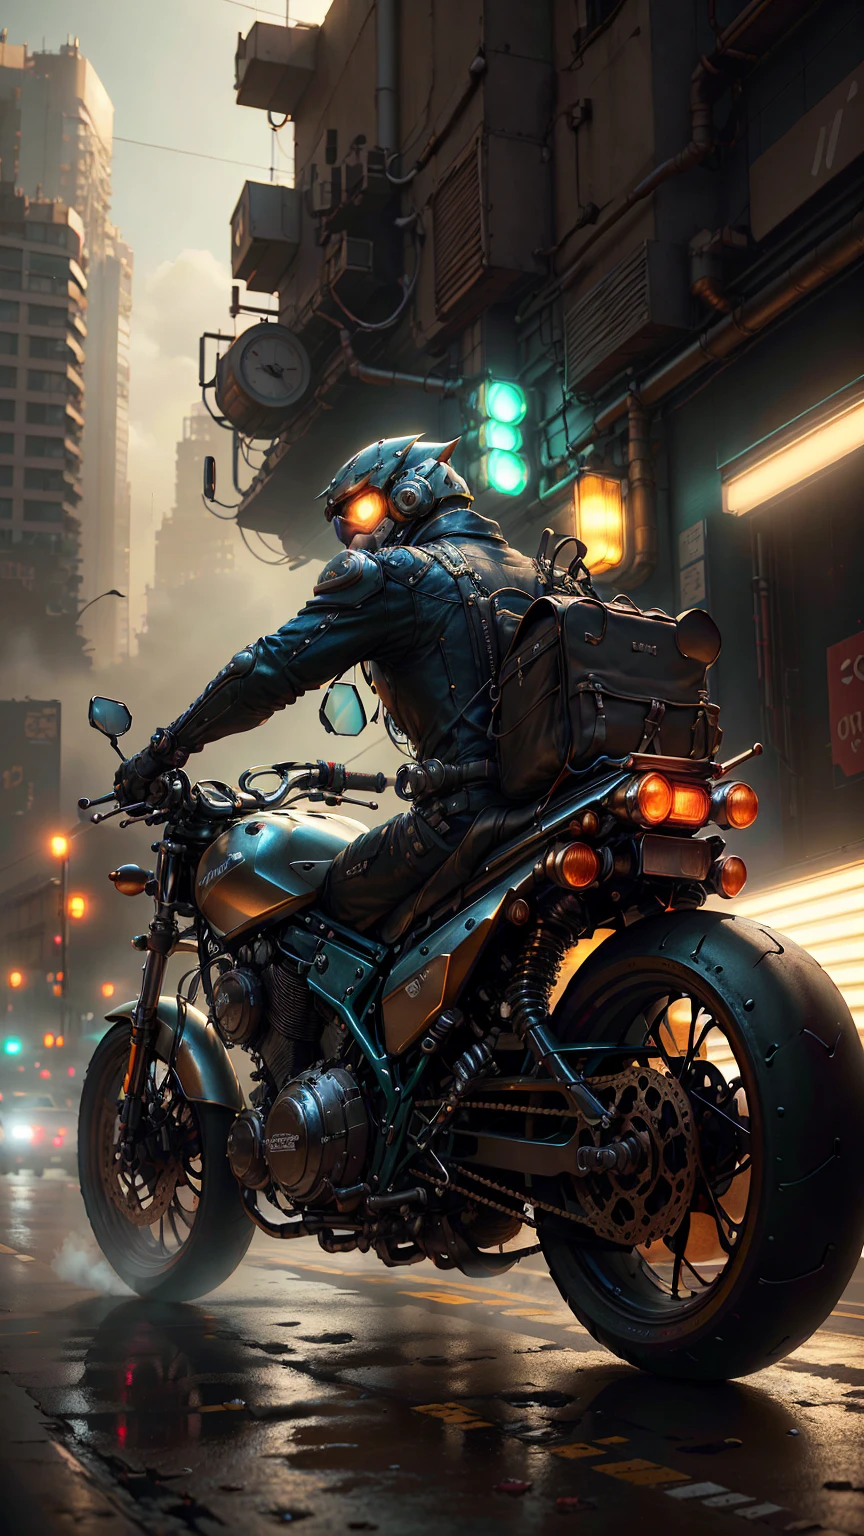 detailed cyberpunk motorcycle, futuristic motorcycle, riding on the road, motorcycle from behind view, 1 person riding motorcycle, intricate details, high resolution, 8k, photorealistic, hyper detailed, cinematic lighting, dynamic motion blur, gritty urban environment, neon lights, glowing cybernetic elements, chrome accents, weathered texture, mecha-inspired design, complex machinery, industrial cityscape, moody color palette, (mejor calidad,4k,8K,high resolution,obra maestra:1.2),ultra detallado,Sharp focus,(realista,photorealista,photo-realista:1.37), extremadamente finos,detalles intrincados,intense lighting,dramatic lighting,changing lighting,cinematic lighting,chiaroscuro lighting,dramatic shadows,Dramatic moments,vivid colors,colores intensos,Contraste profundo,cinematic depth of field,cinematographic composition,cinematic camera angle